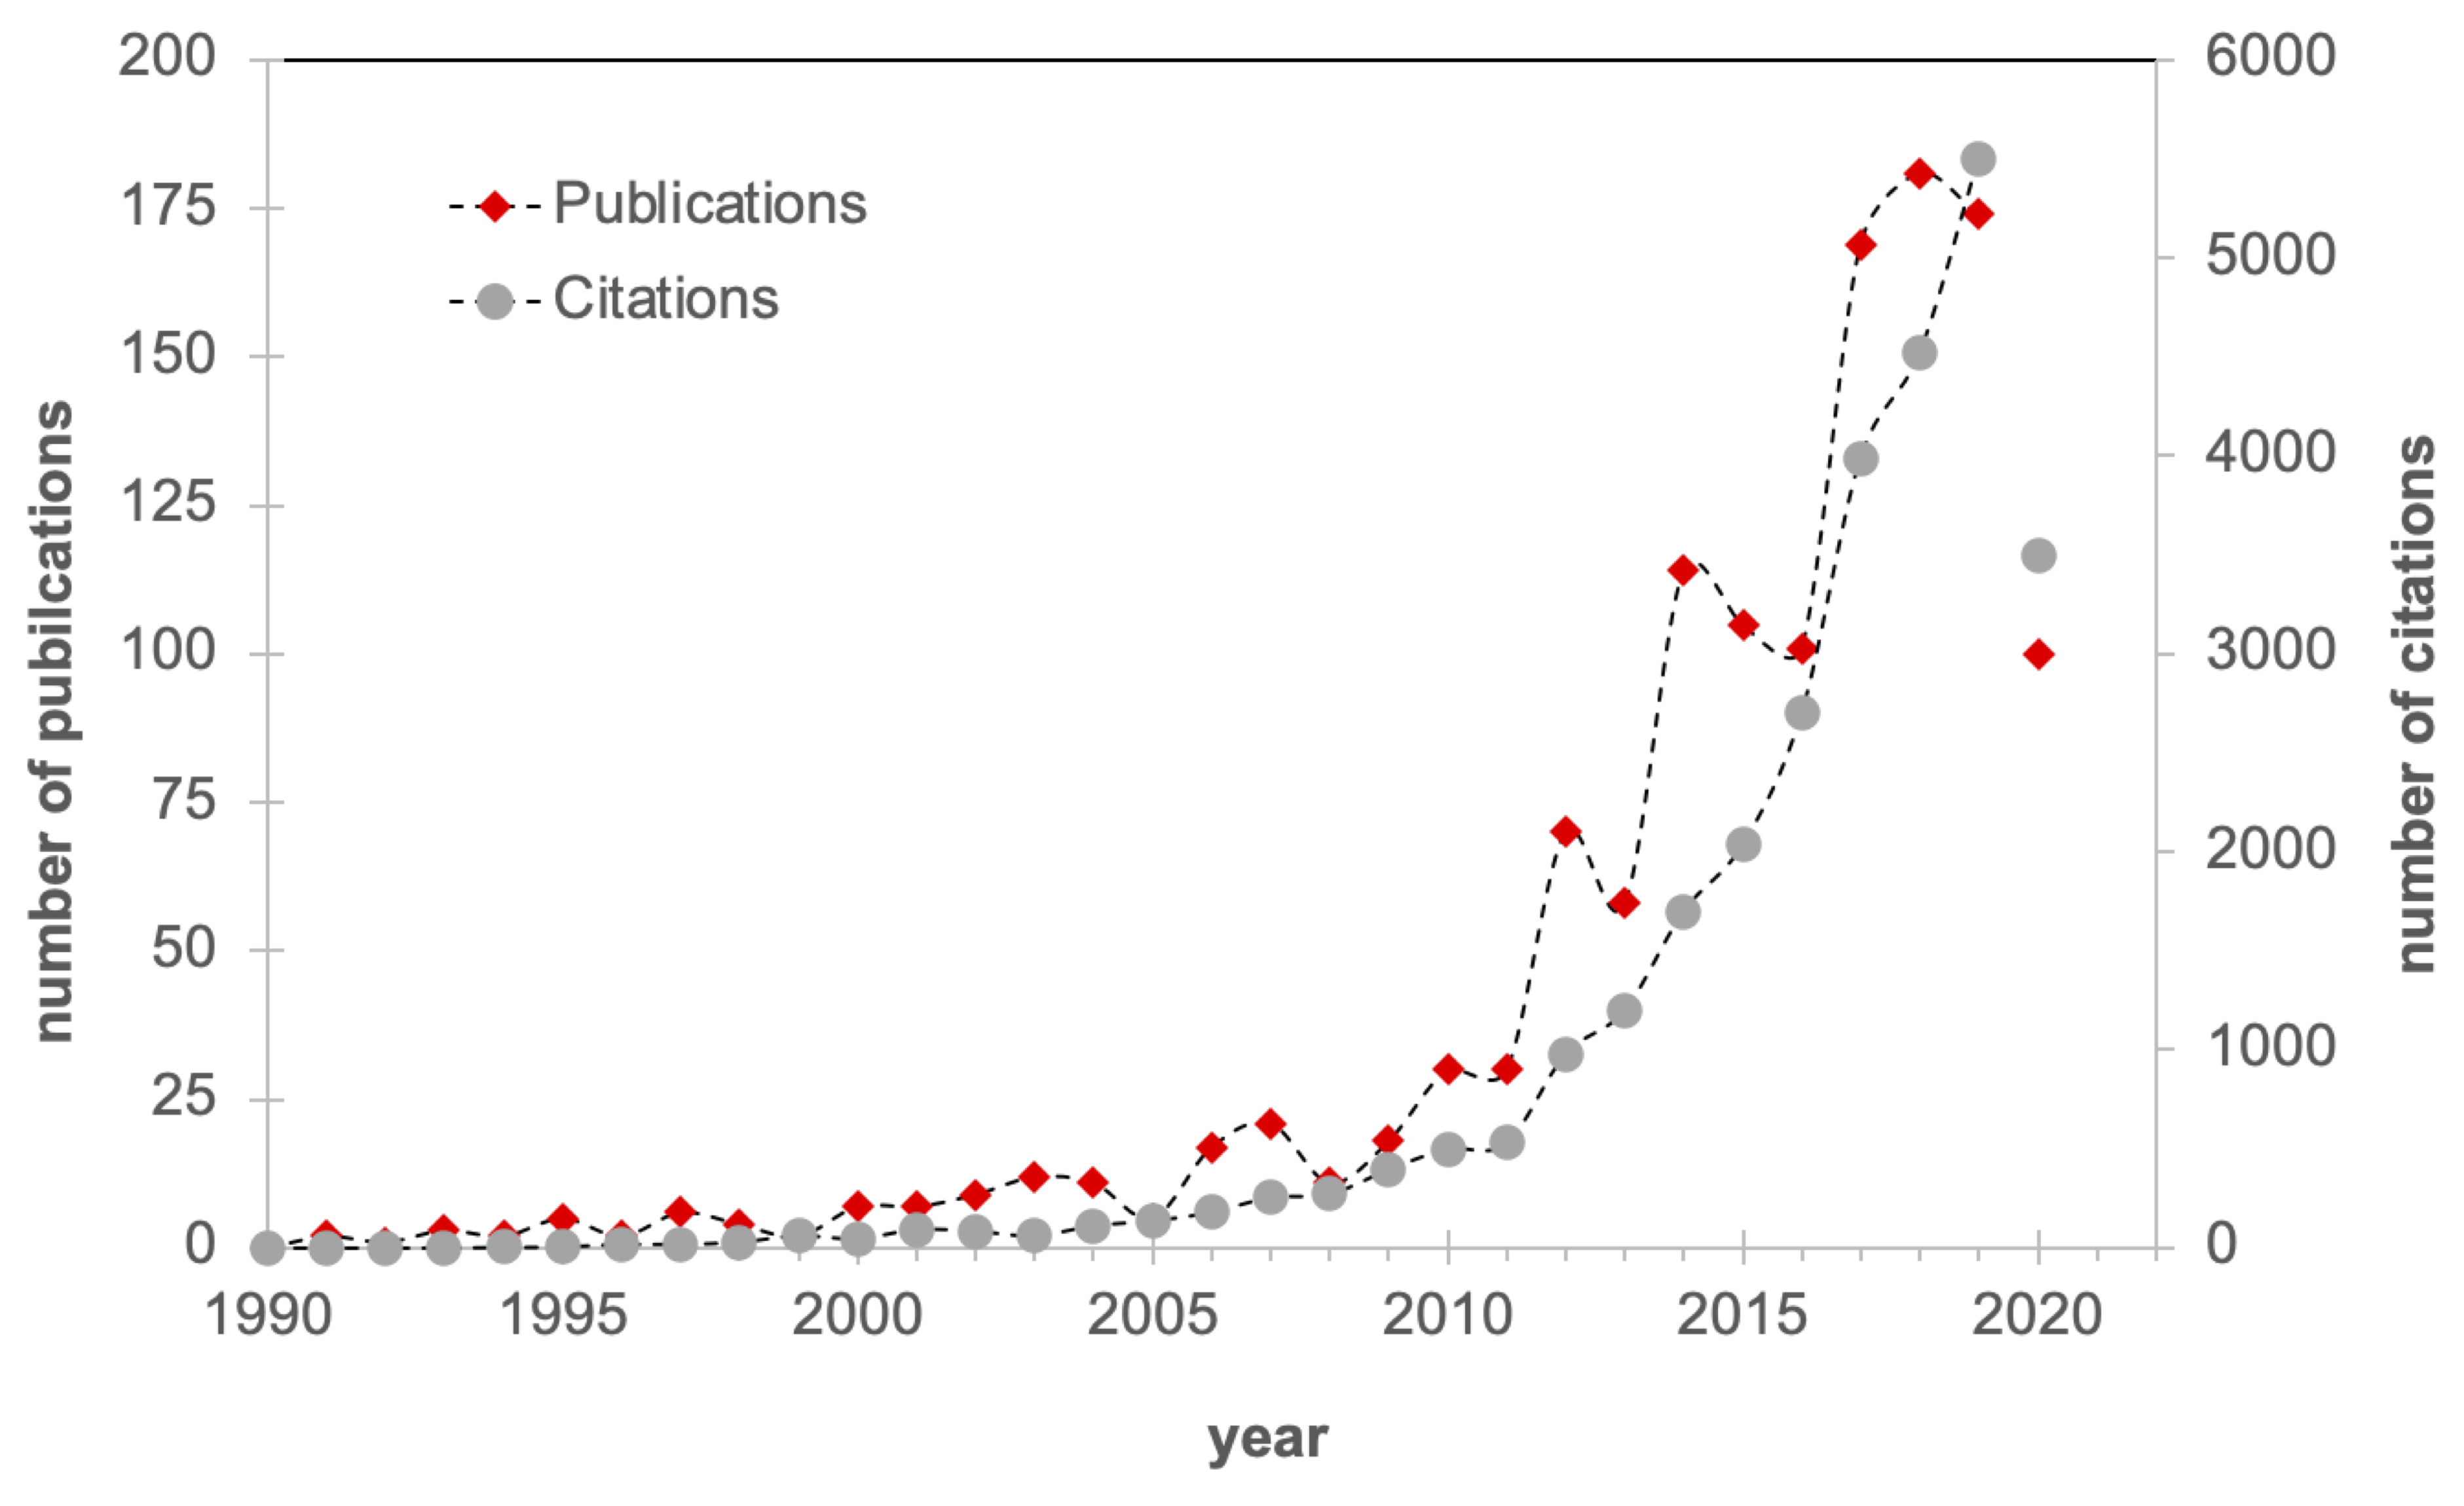 Evolution in the number of publications related to the ISCC topic